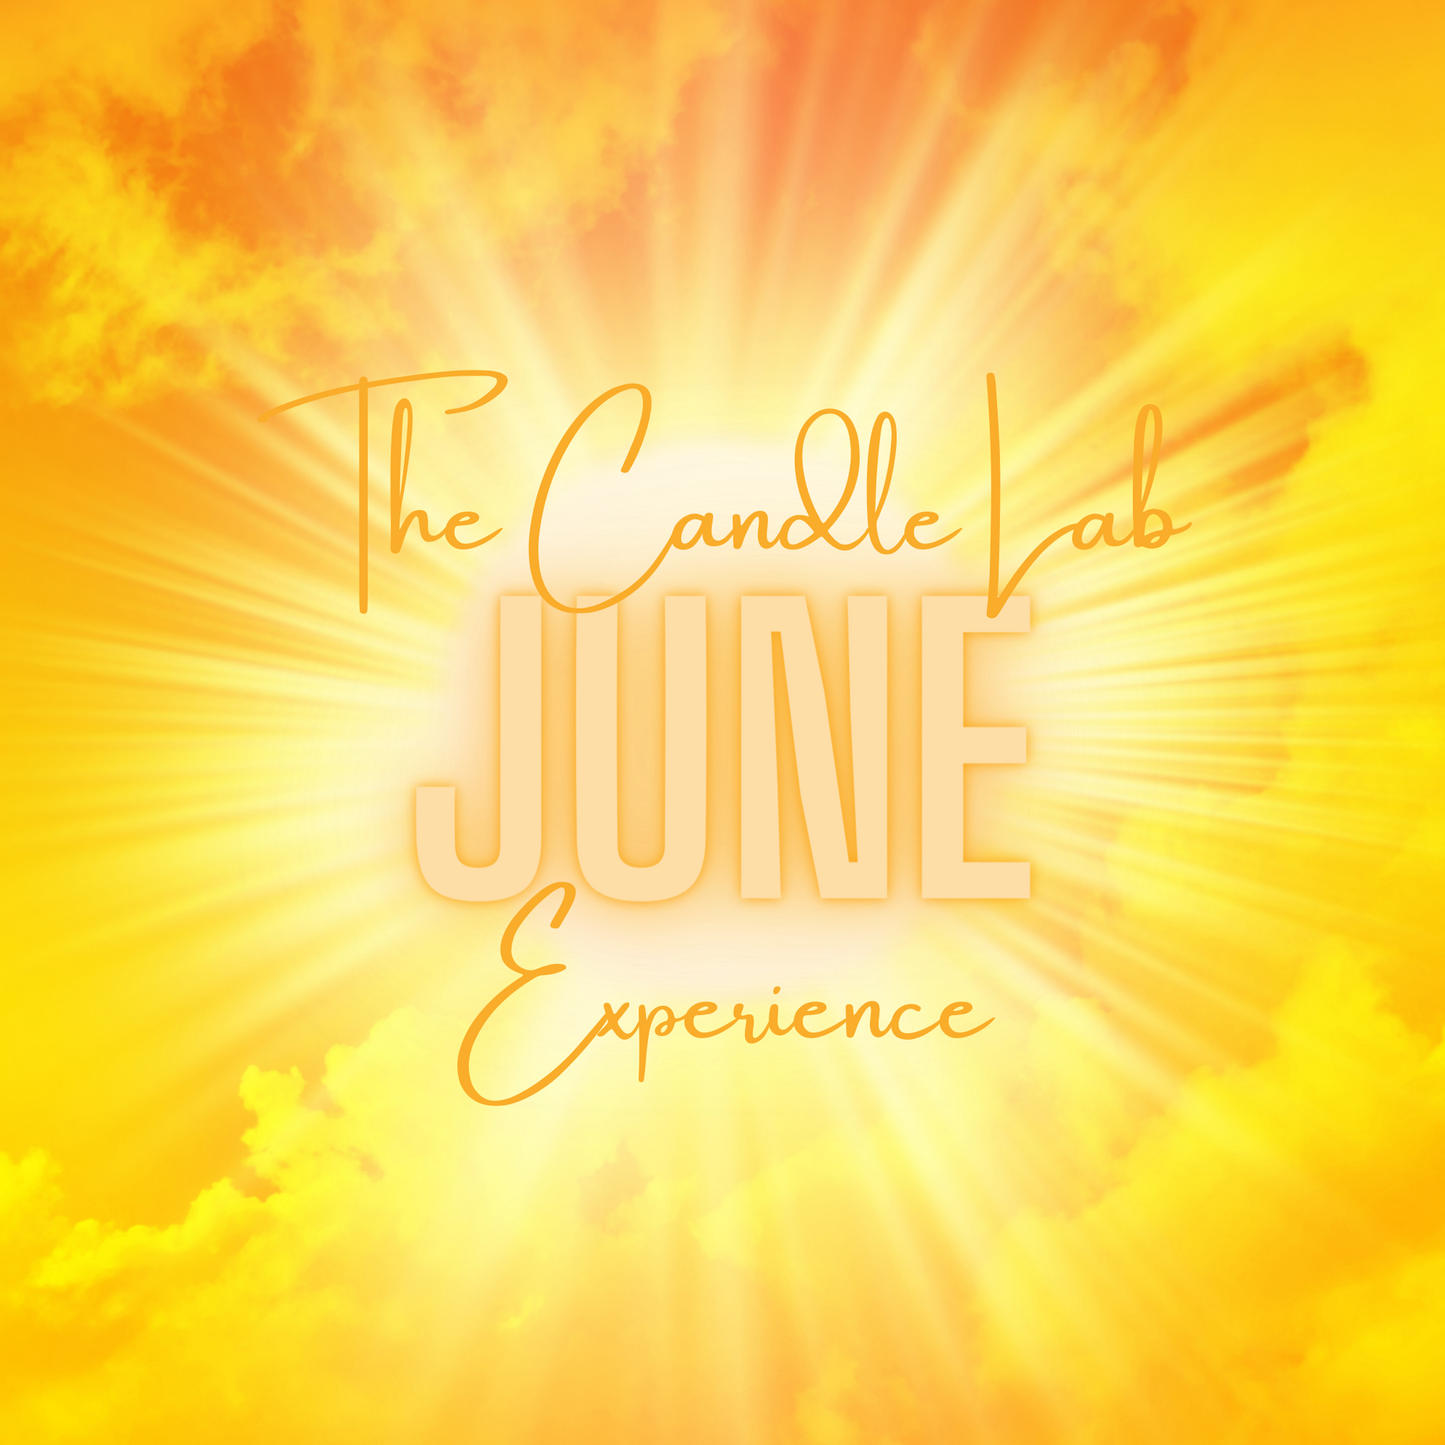 June - The Candle Experience